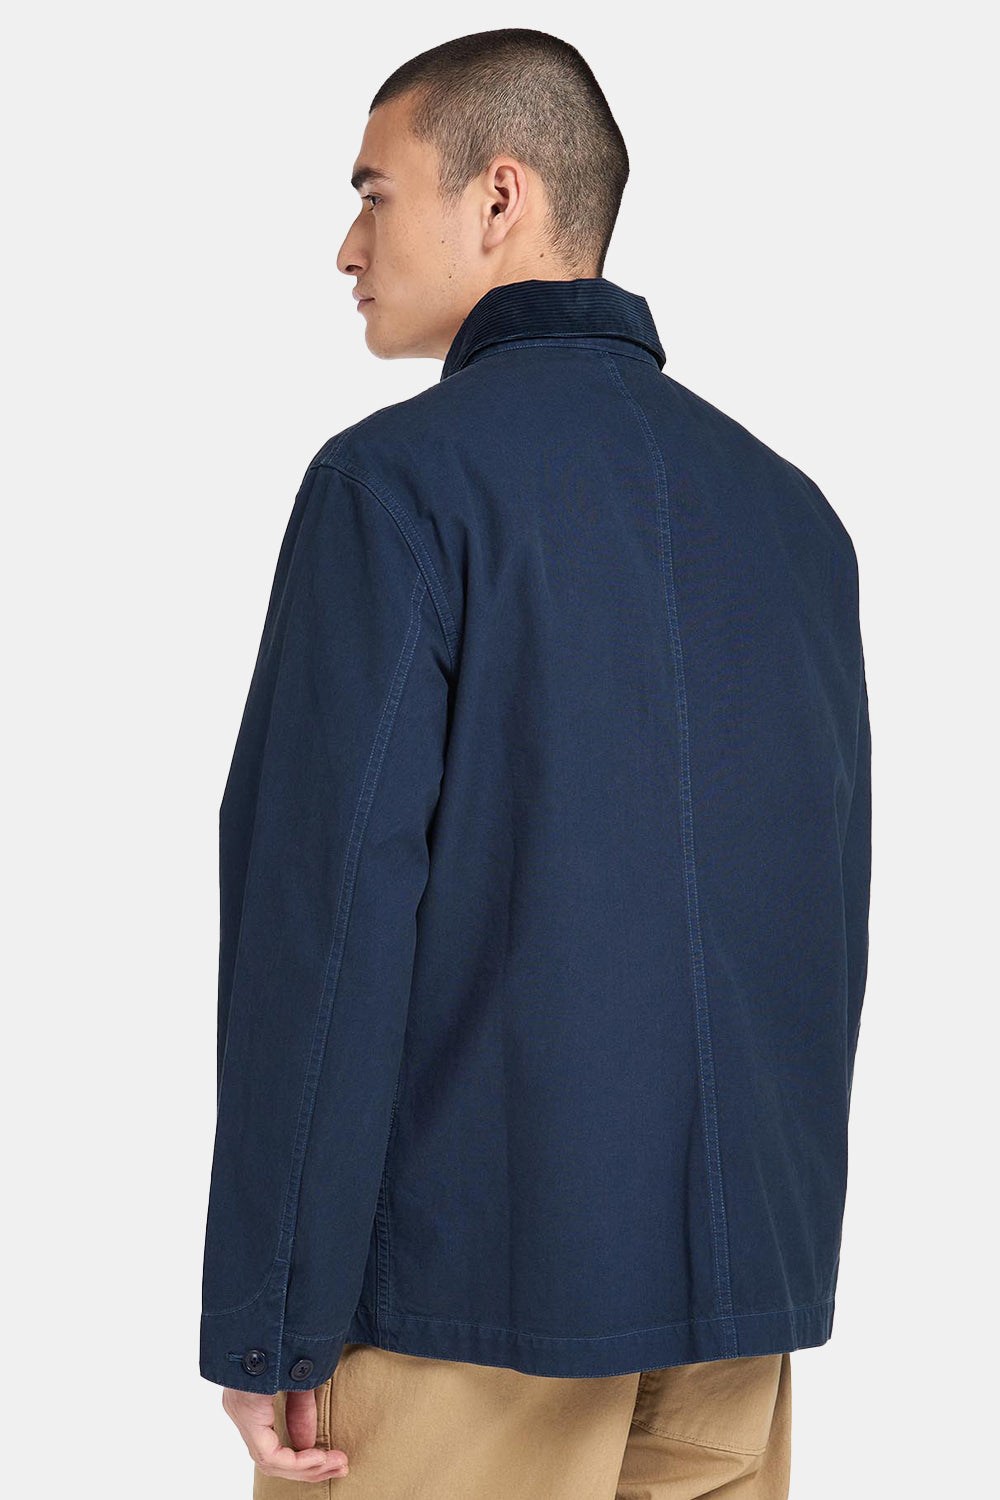 Barbour White Label Haruta Chore Jacket (Navy) | Number Six